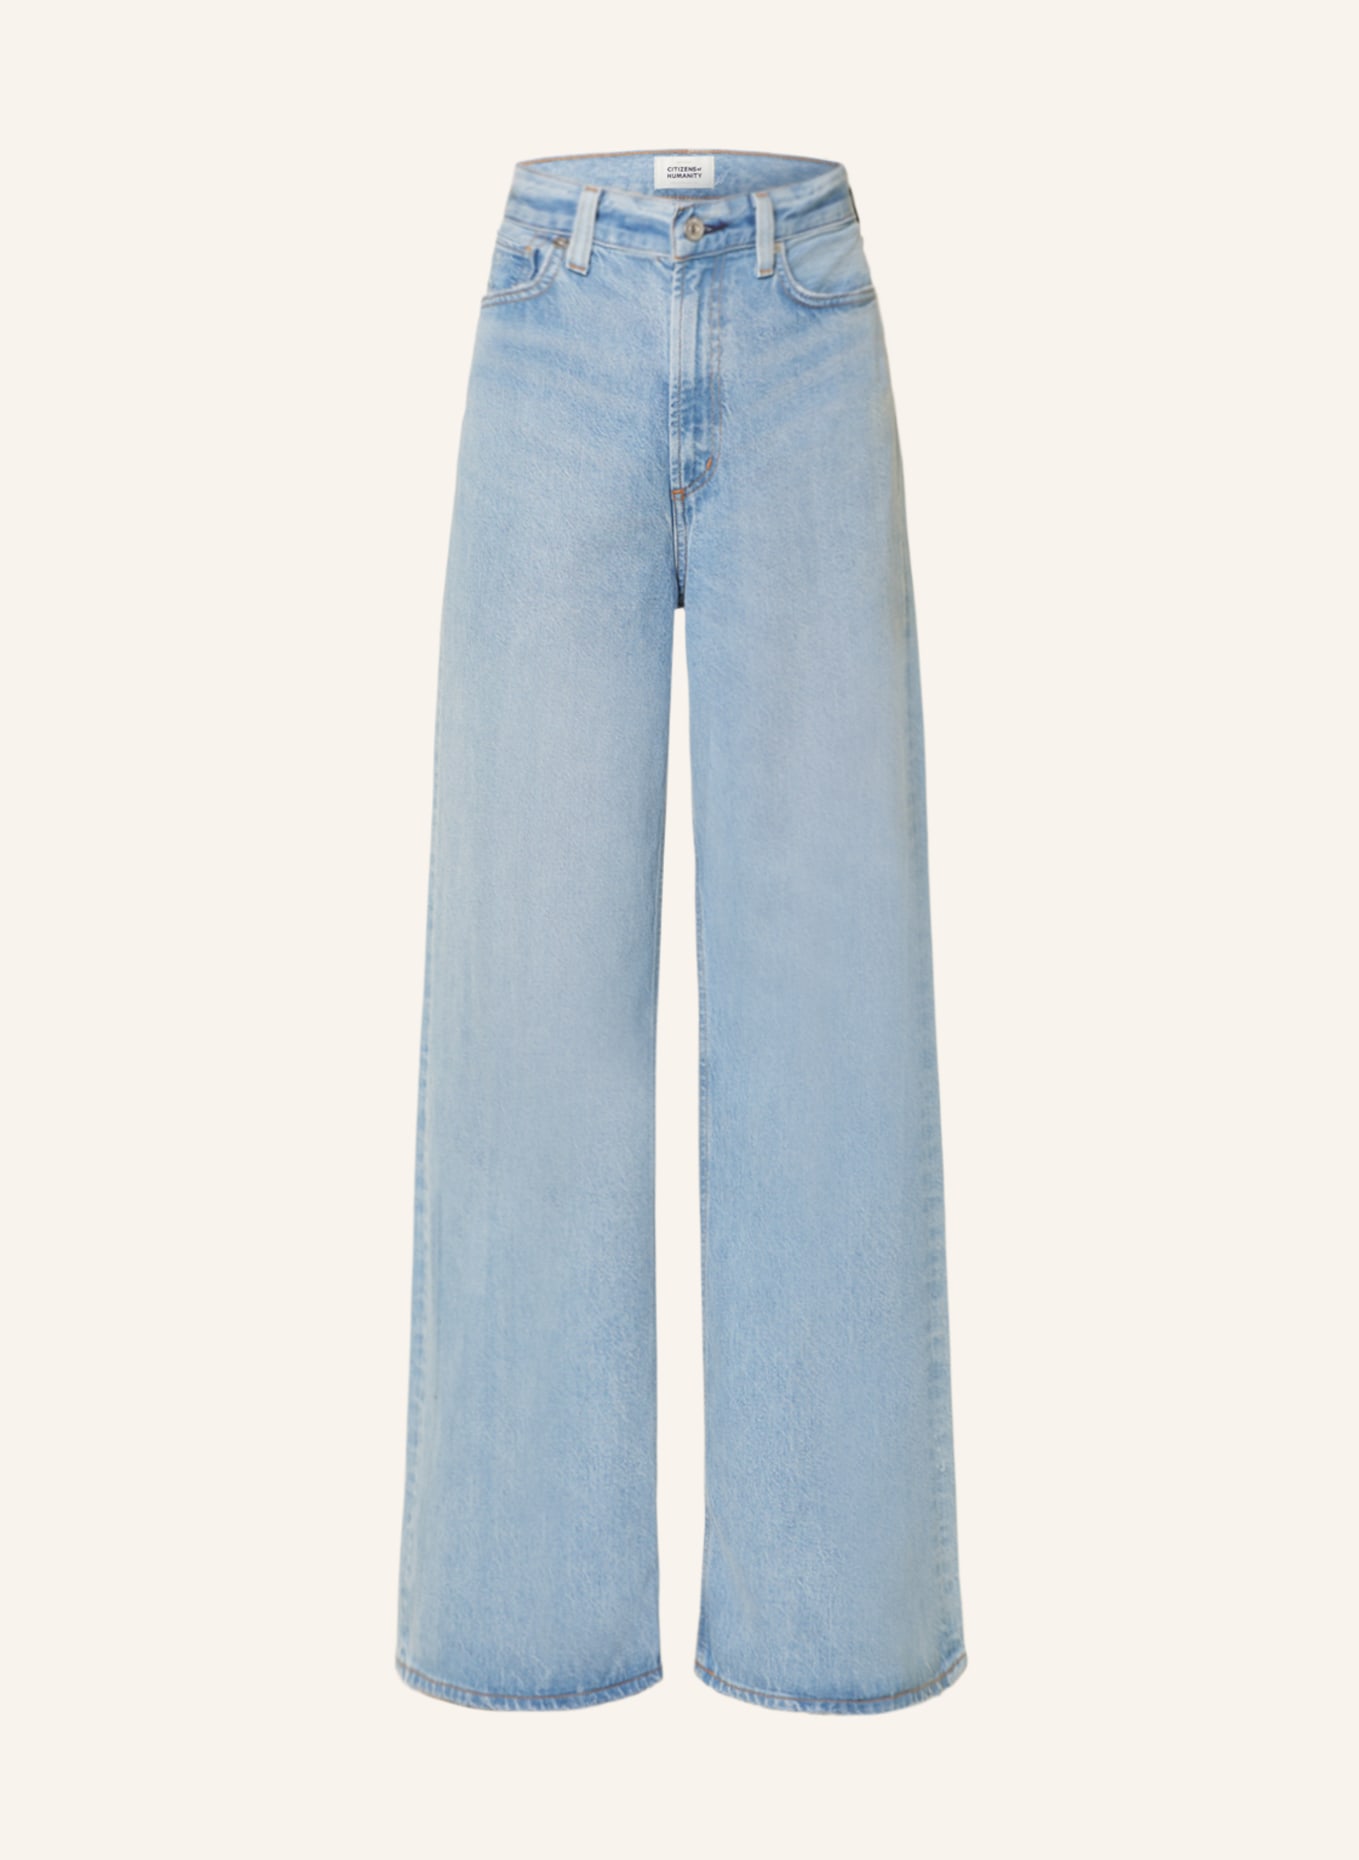 CITIZENS of HUMANITY Jeans PALOMA, Farbe: Alemayde lt ind (Bild 1)